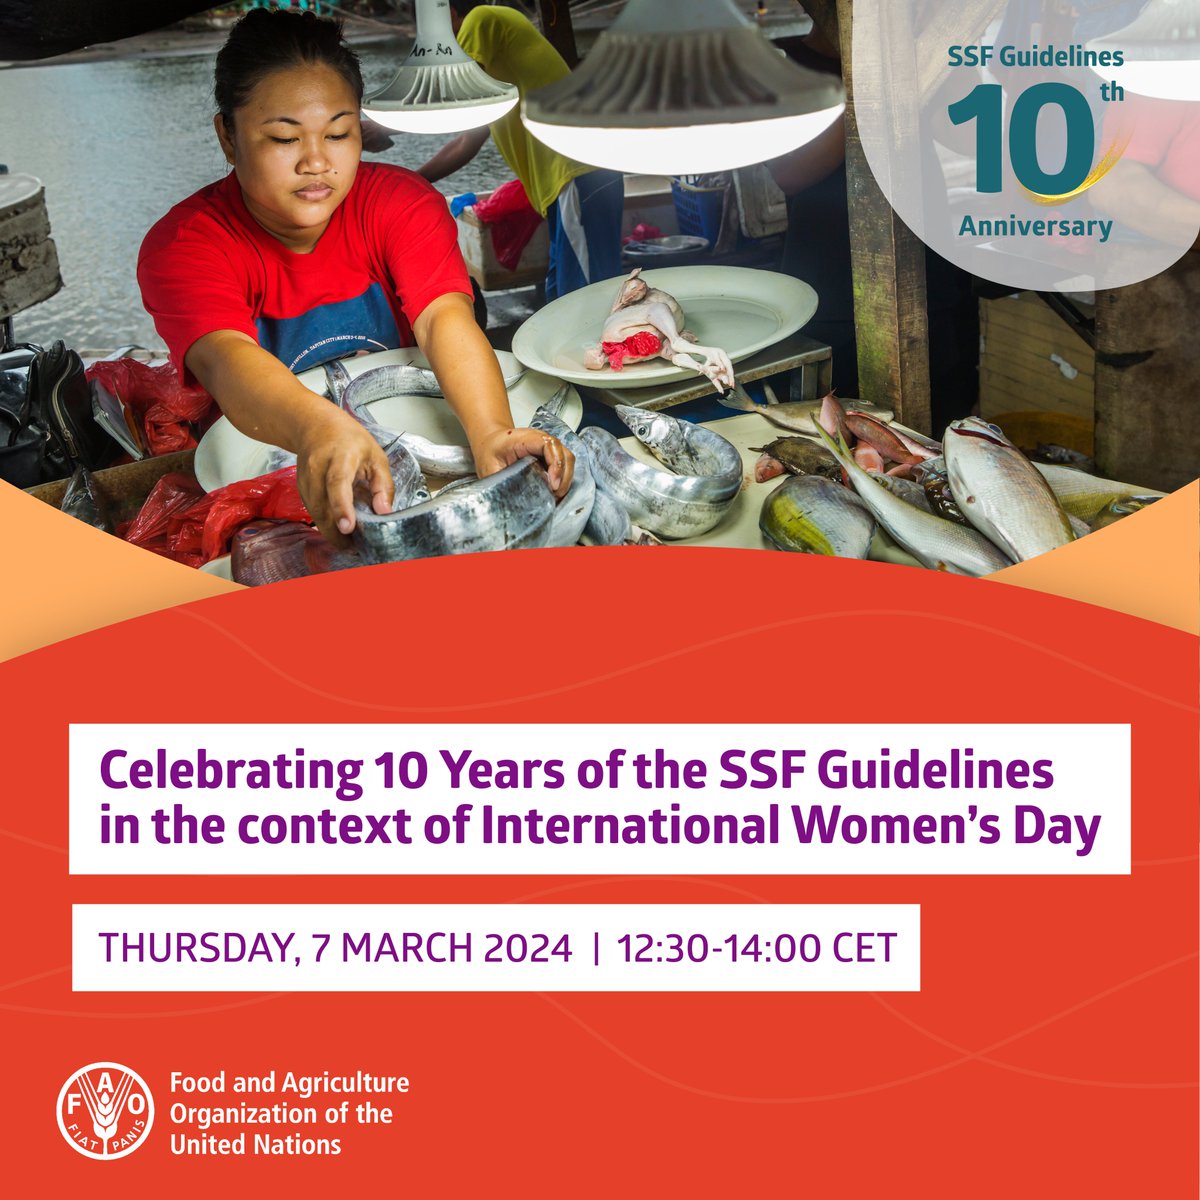 📢 Join us tomorrow, 7 March, for a special event exploring🔟 years of #SSFGuidlines and their efforts to advance #GenderEquality in #fisheries and #aquaculture around the world. Register now 👉 bit.ly/3wJbFwl Let's #InvestInWomen to accelerate progress. #IWD2024